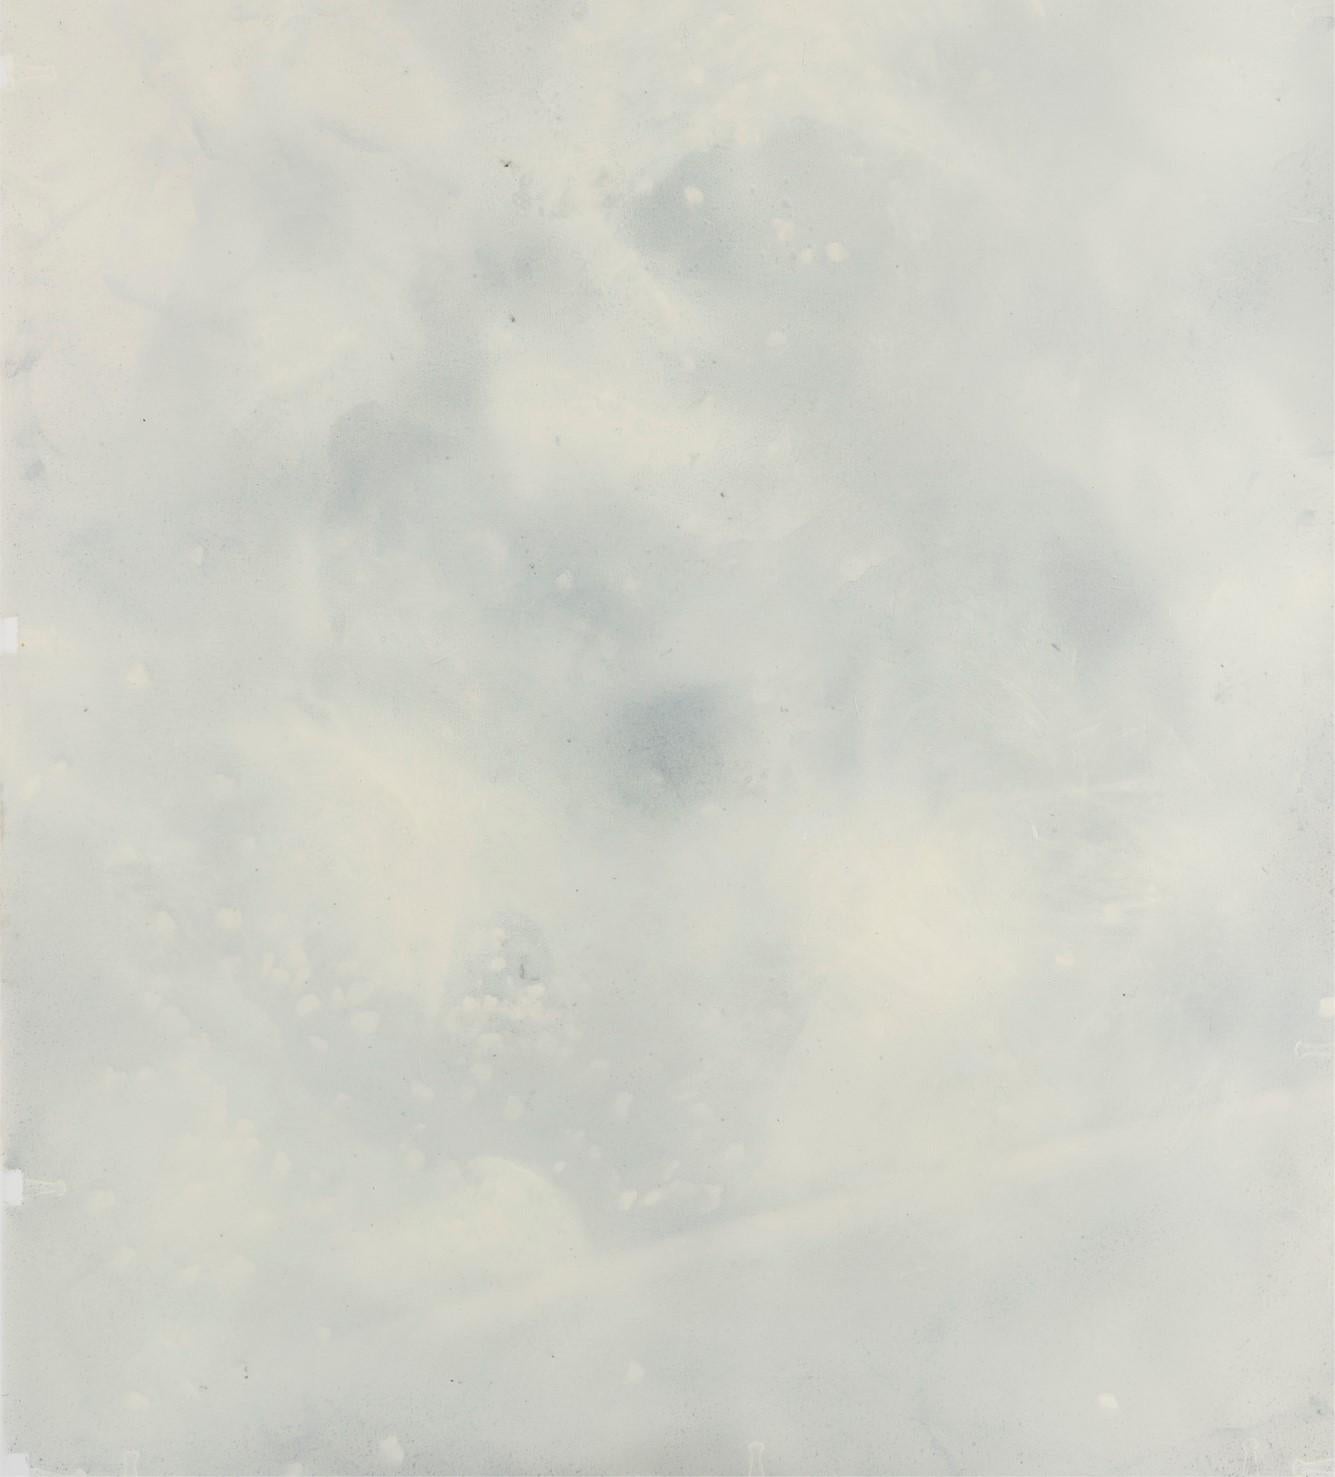 Untitled 016 [Remains of the Remains 016] - Contemporary Art, Abstract, Gray - Abstract Expressionist Painting by Zsolt Berszán